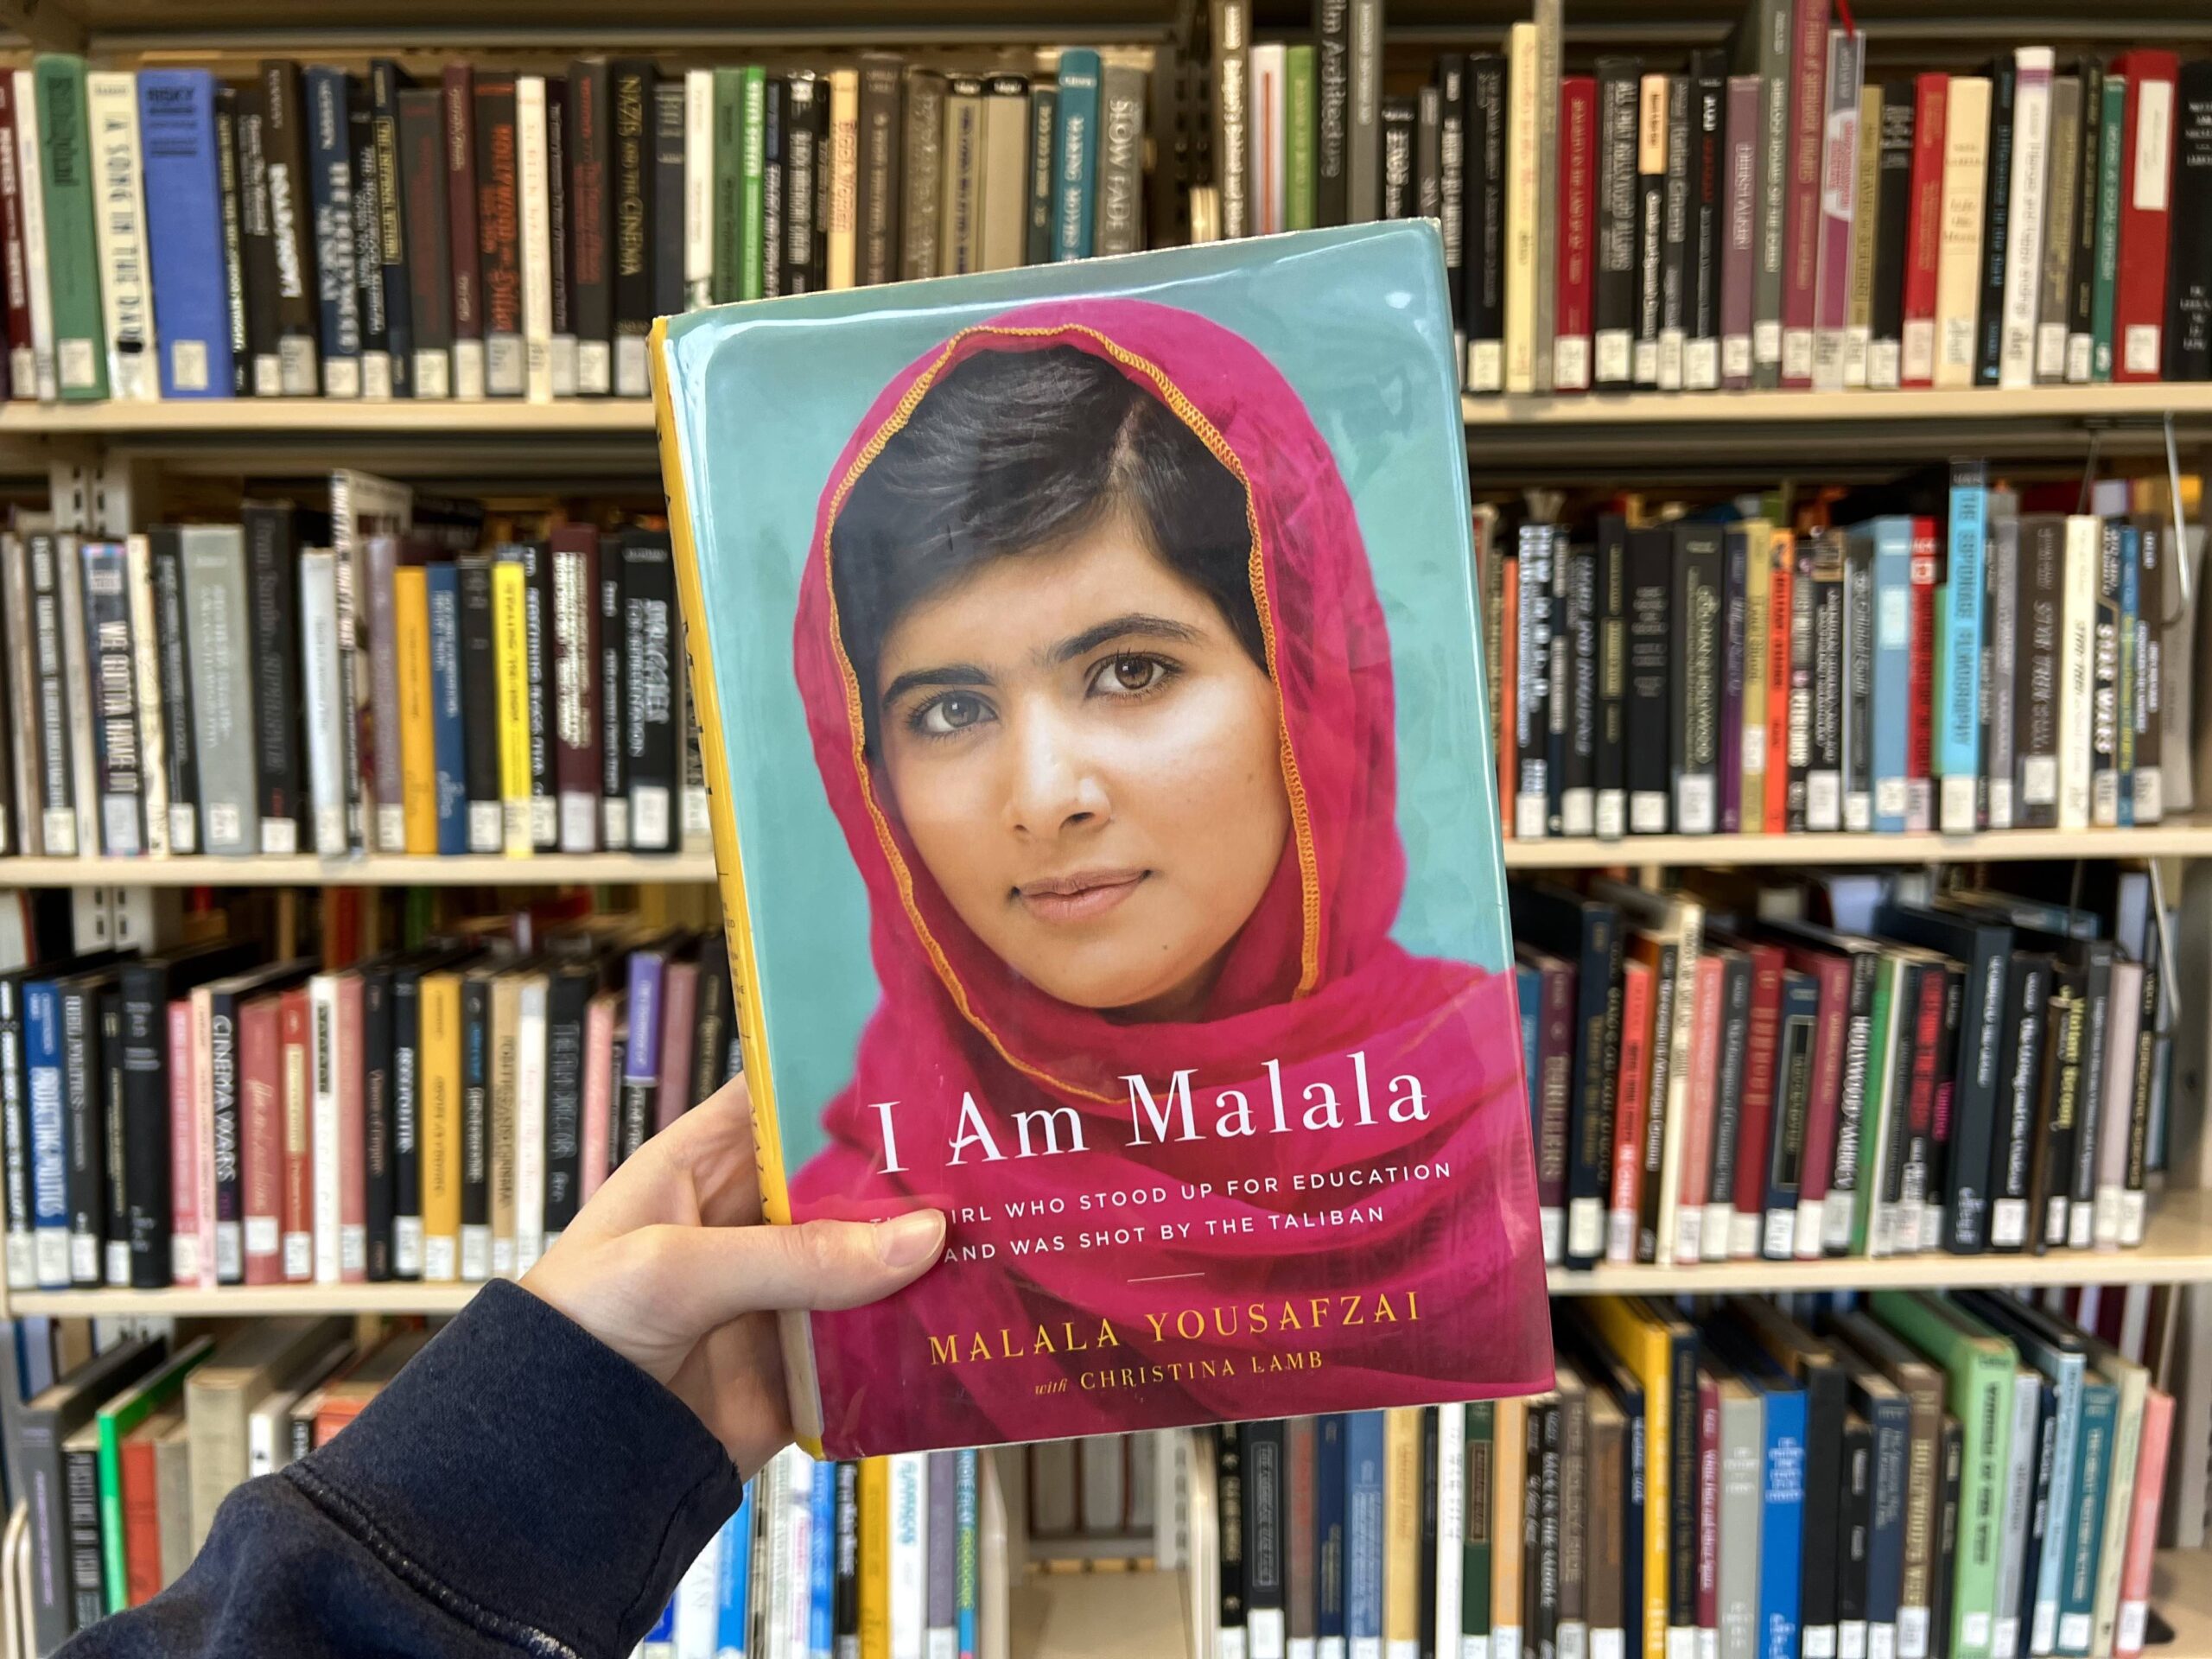 Person holding the book, "I Am Malala," in front of a bookcase.